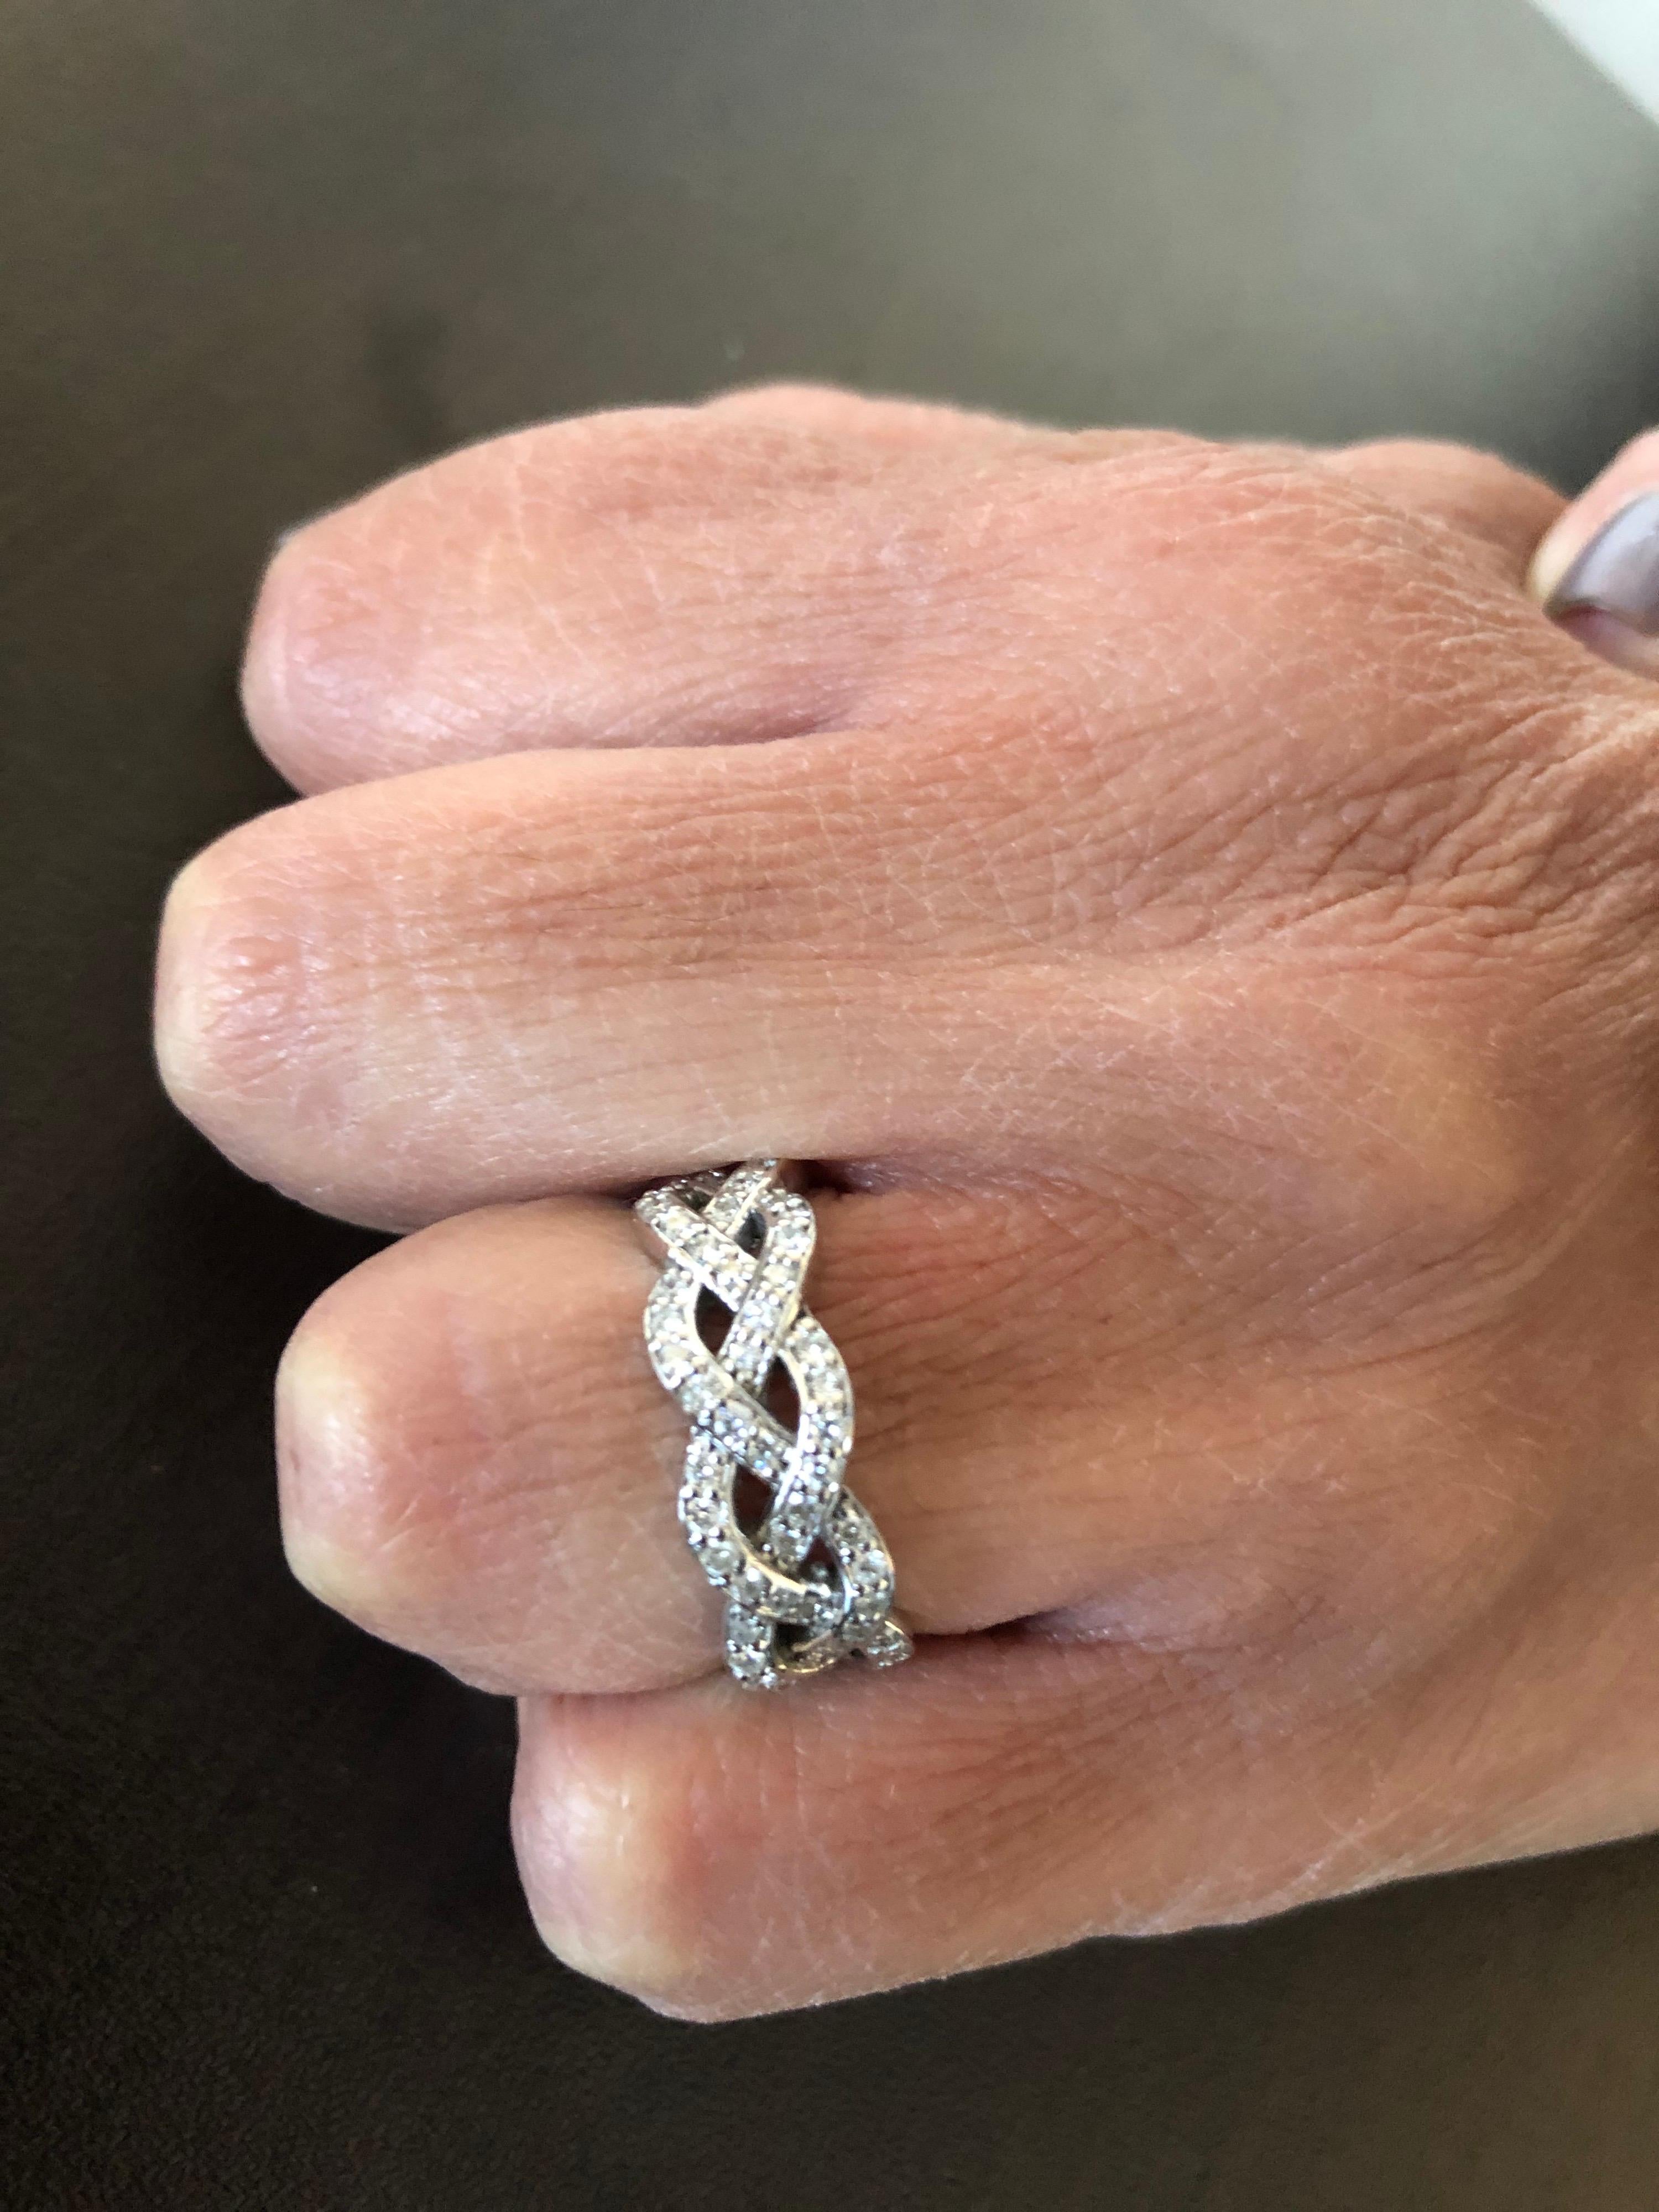 Braided diamond eternity ring set in 14K white gold. The total carat weight is 1.16. The color of the stones are G, the clarity is SI. The band is a size 6.5.